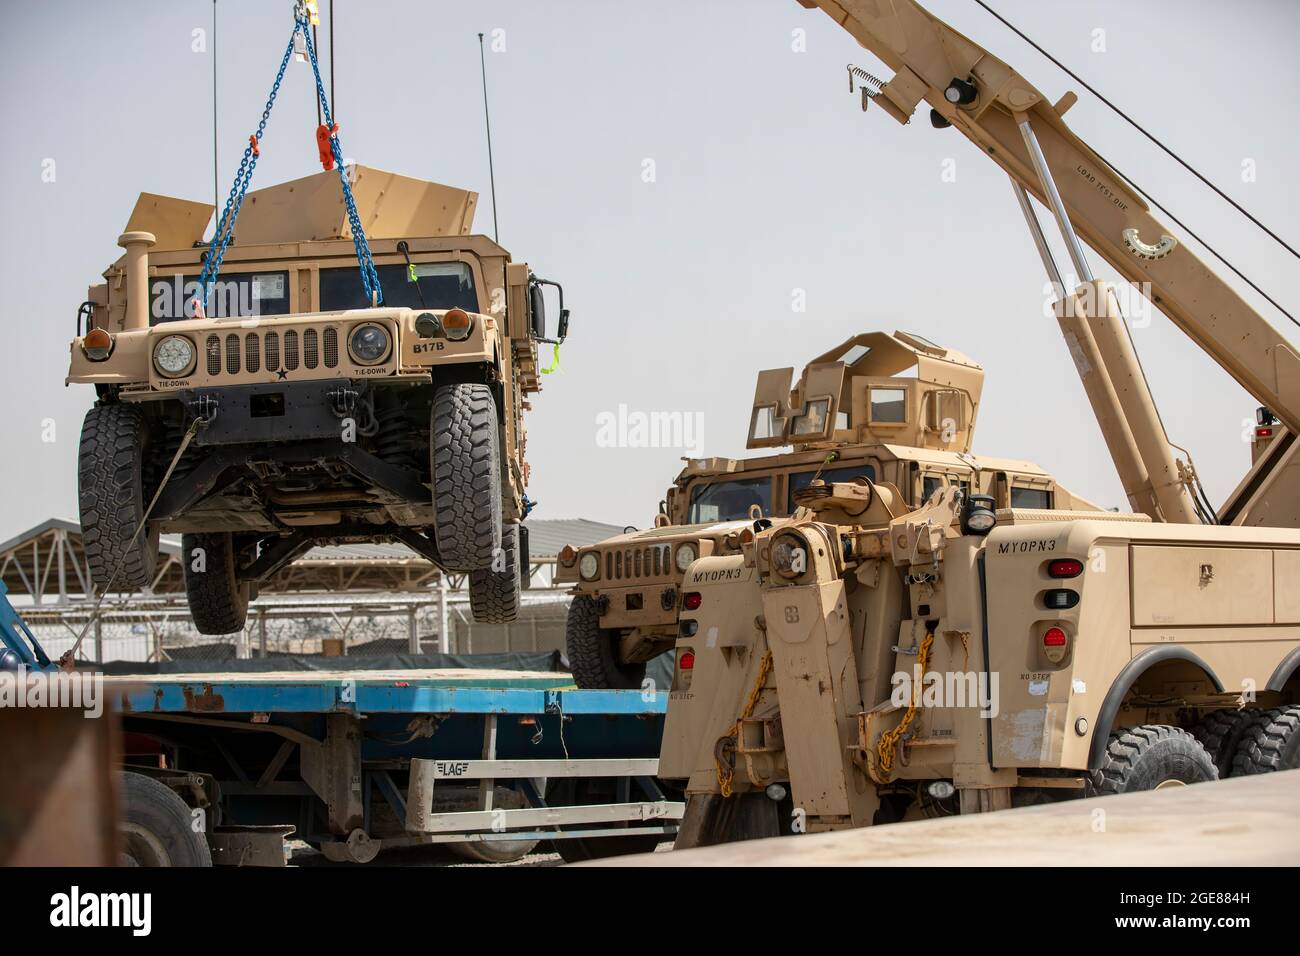 U.S. Soldiers and contractors load High Mobility Multi-purposed Wheeled Vehicles, HUMVs, to be sent for transport in support of the Resolute Support retrograde mission in Afghanistan, July 13, 2020. (U.S. Army photo by Sgt. Jeffery J. Harris) Stock Photo